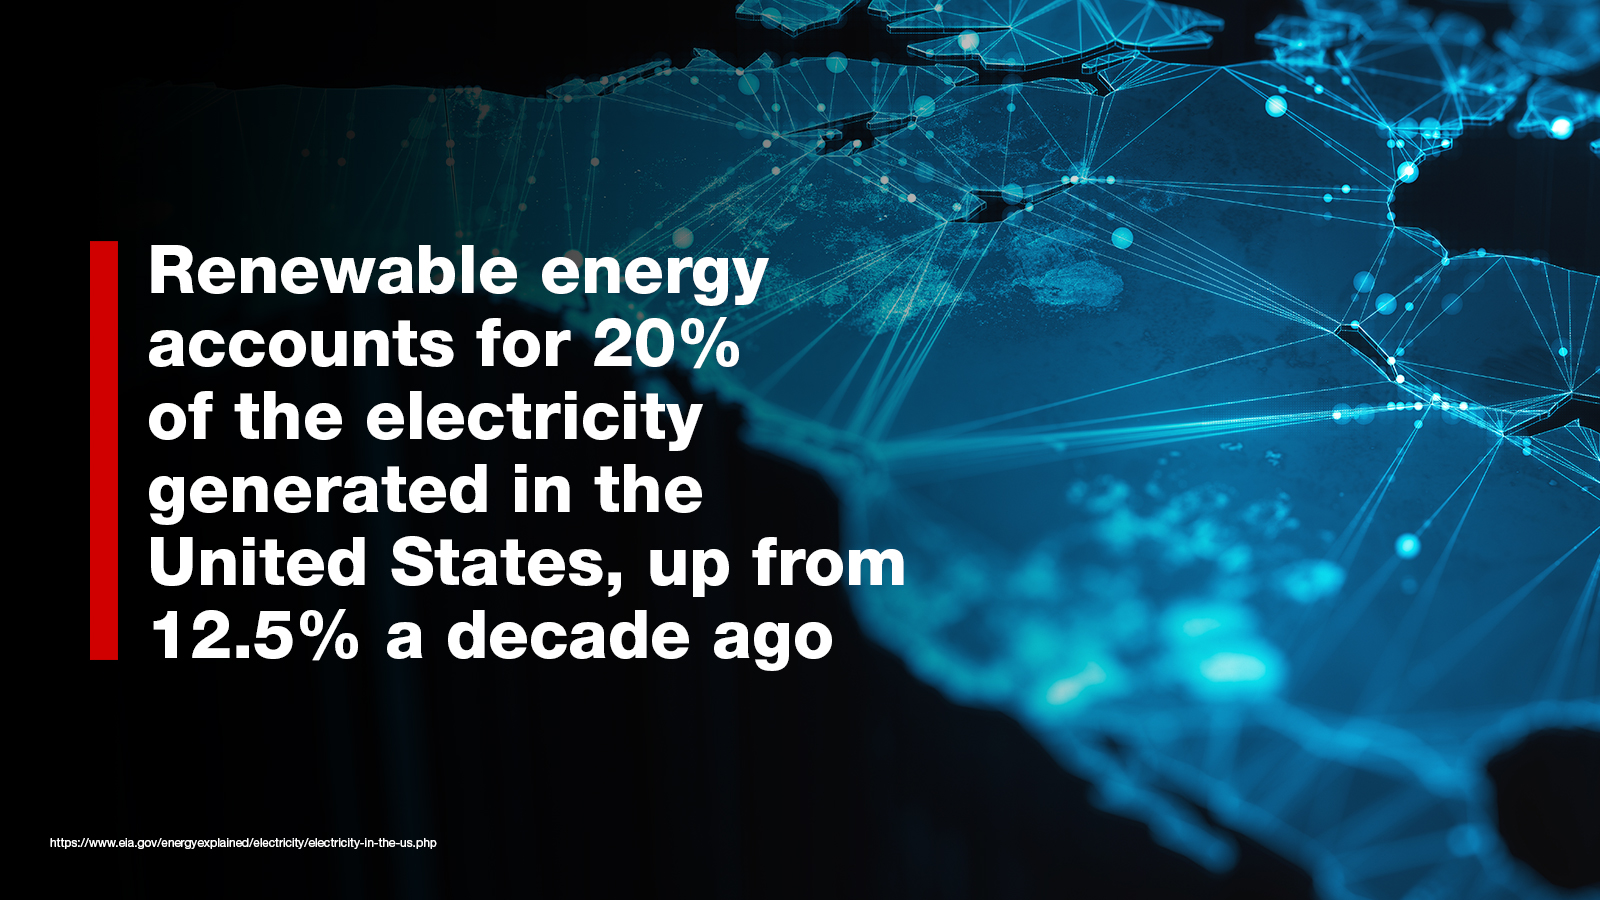 Renewable energy use has increased to 20% from 12.5% in the U.S. over the last decadeer a 